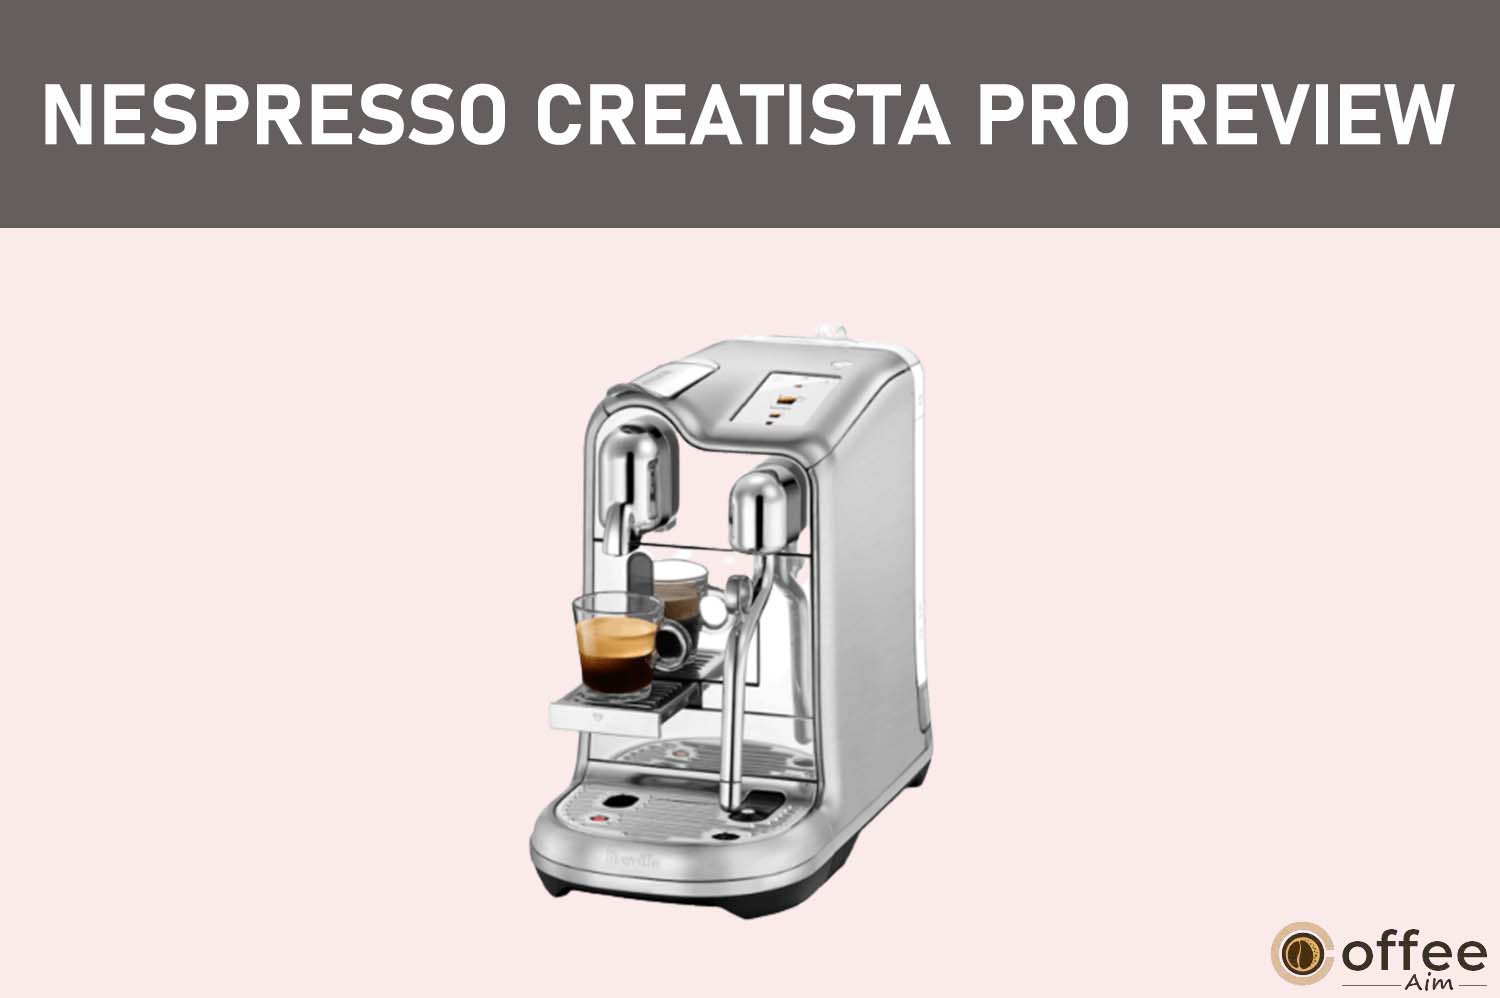 Featured image for the article "Nespresso Creatista Pro Review"